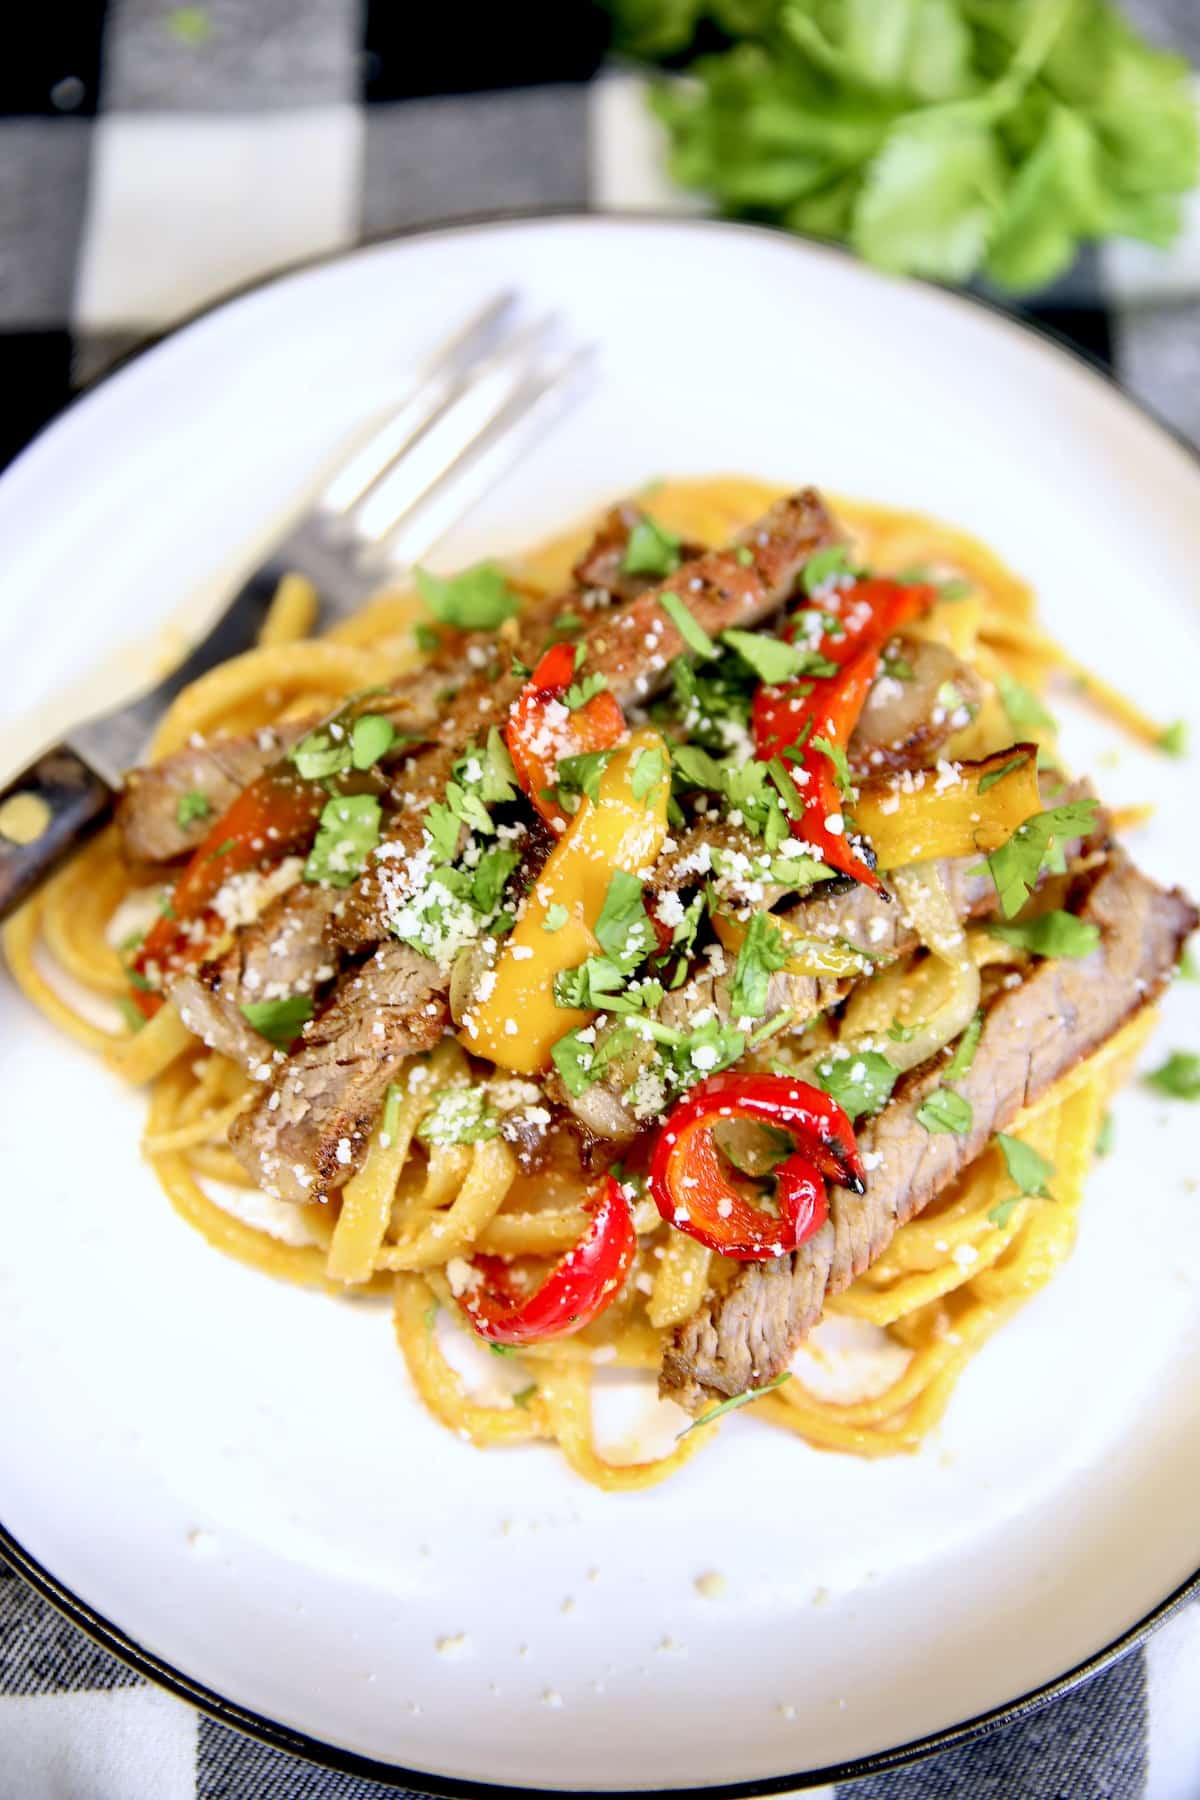 Plate of pasta with sliced steak, peppers, onions.